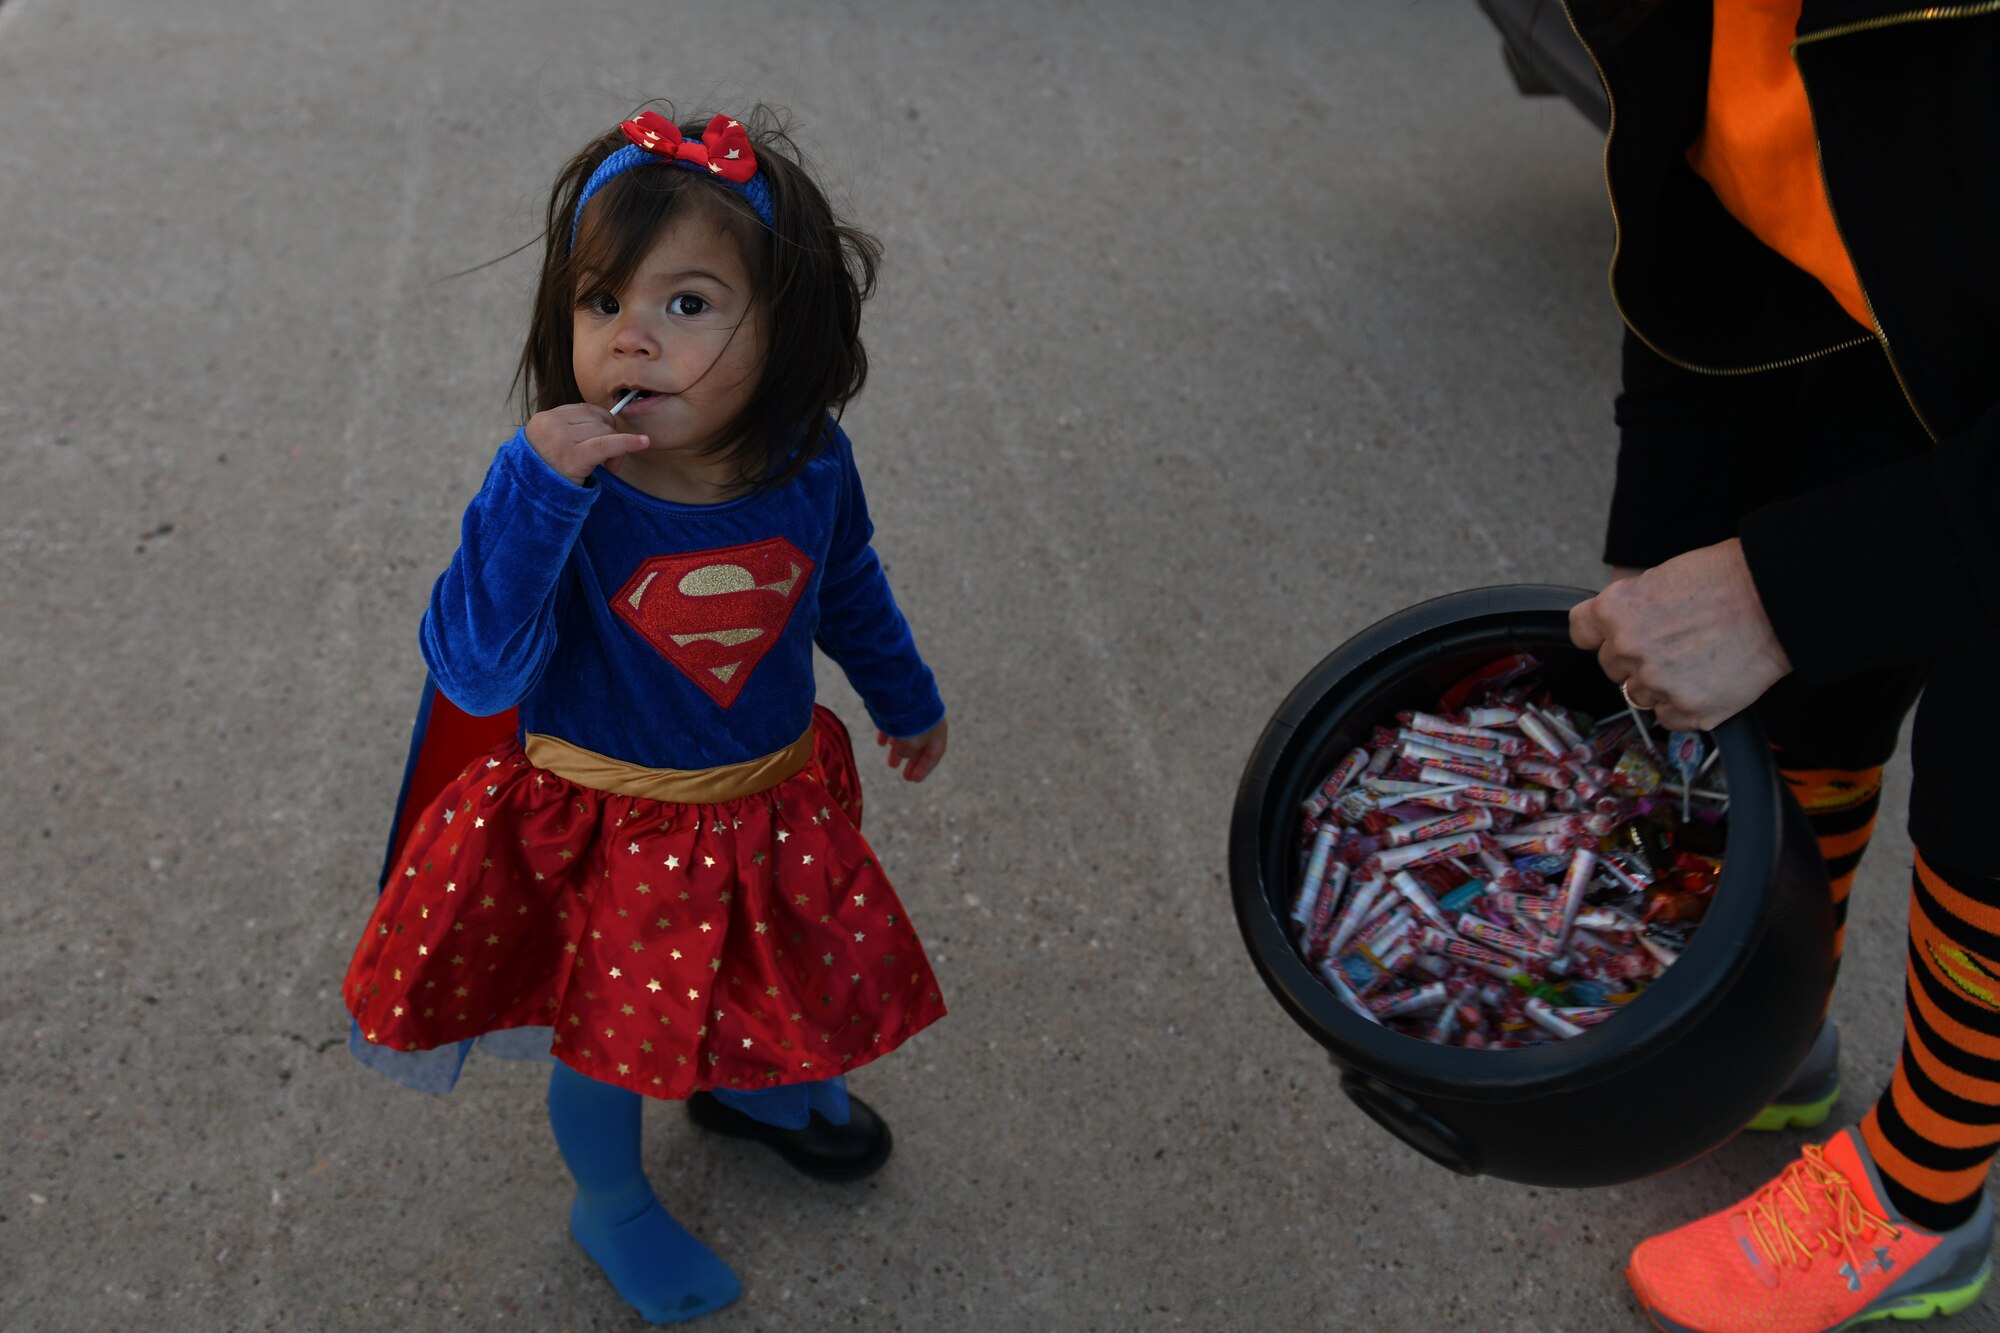 The 28th Bomb Wing Safety Office encourages parents and children to take extra safety precautions before going trick-or-treating on Halloween night. Actions such as looking both ways before crossing the street and keeping children close when using crosswalks can help prevent accidents and injuries.